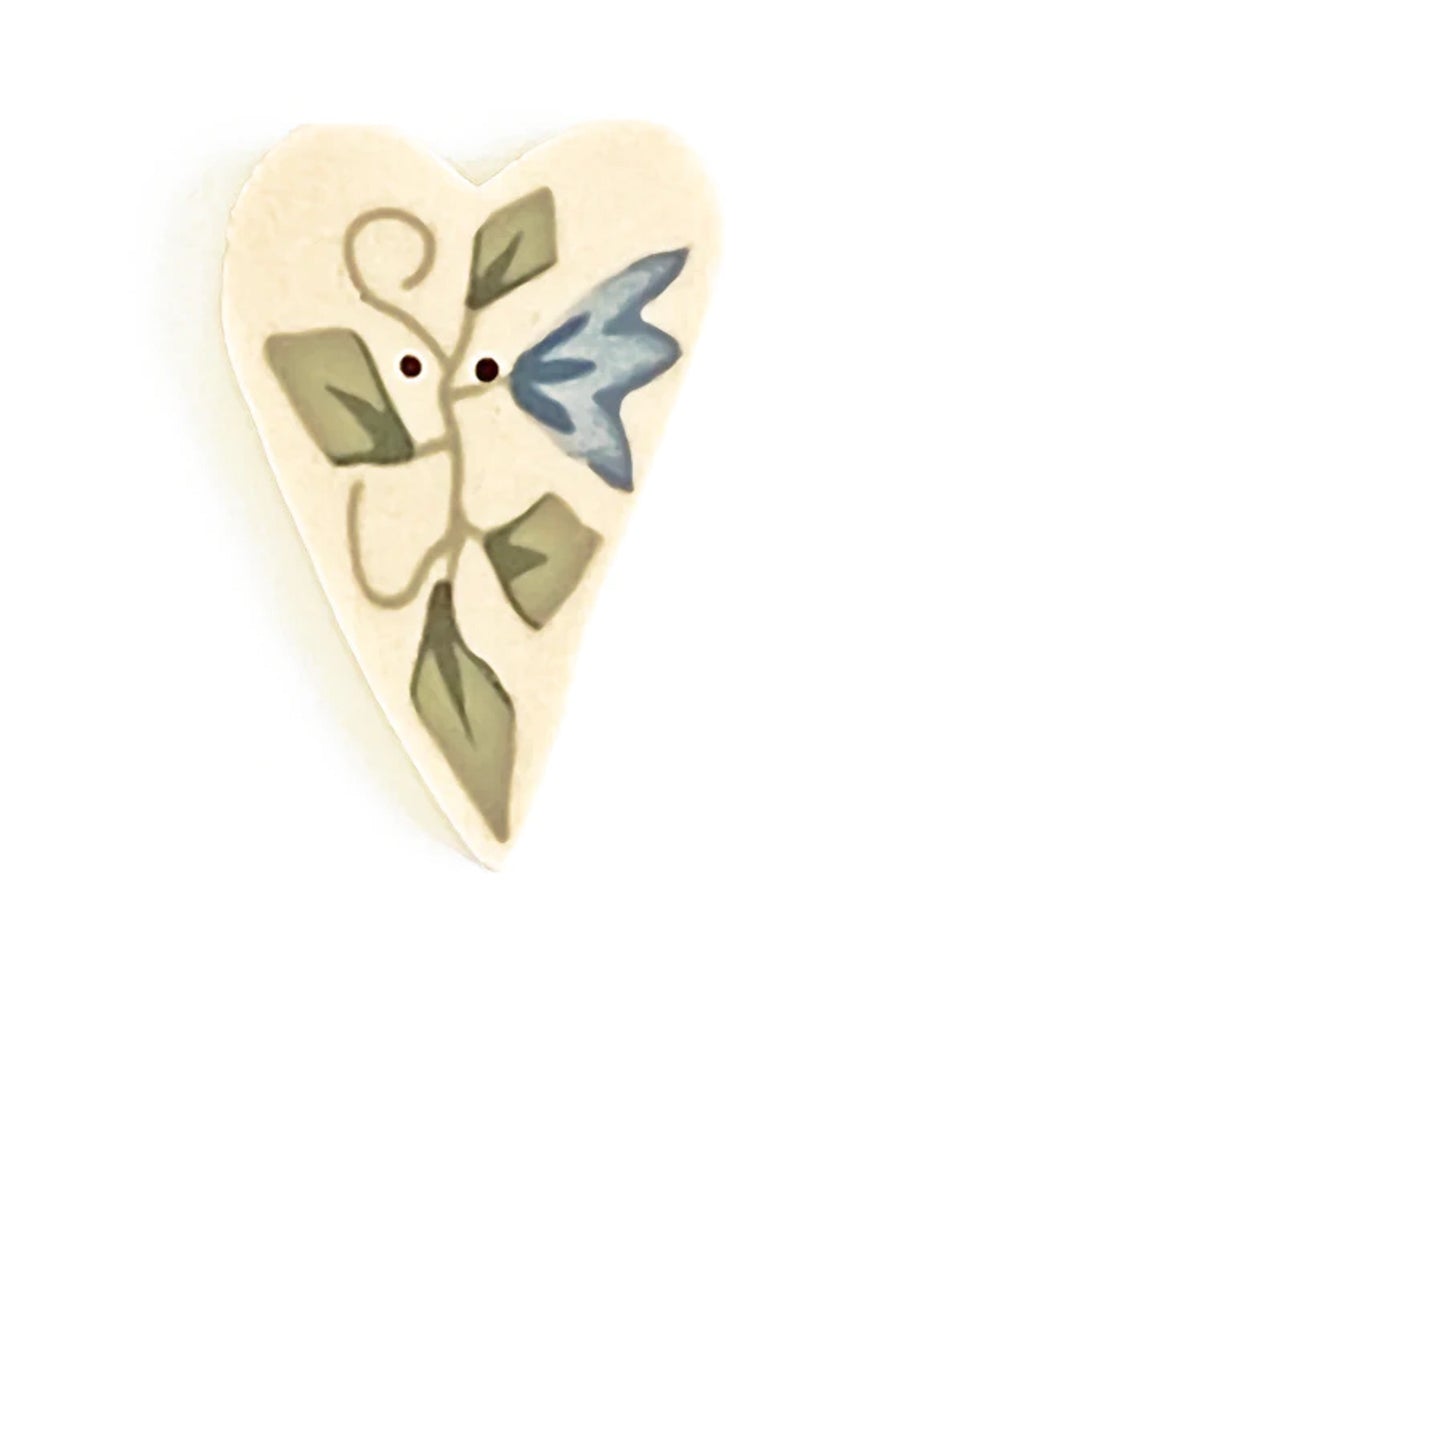 Just Another Button Company Tulip Heart, NH1038 flower handmade clay 2-hole button